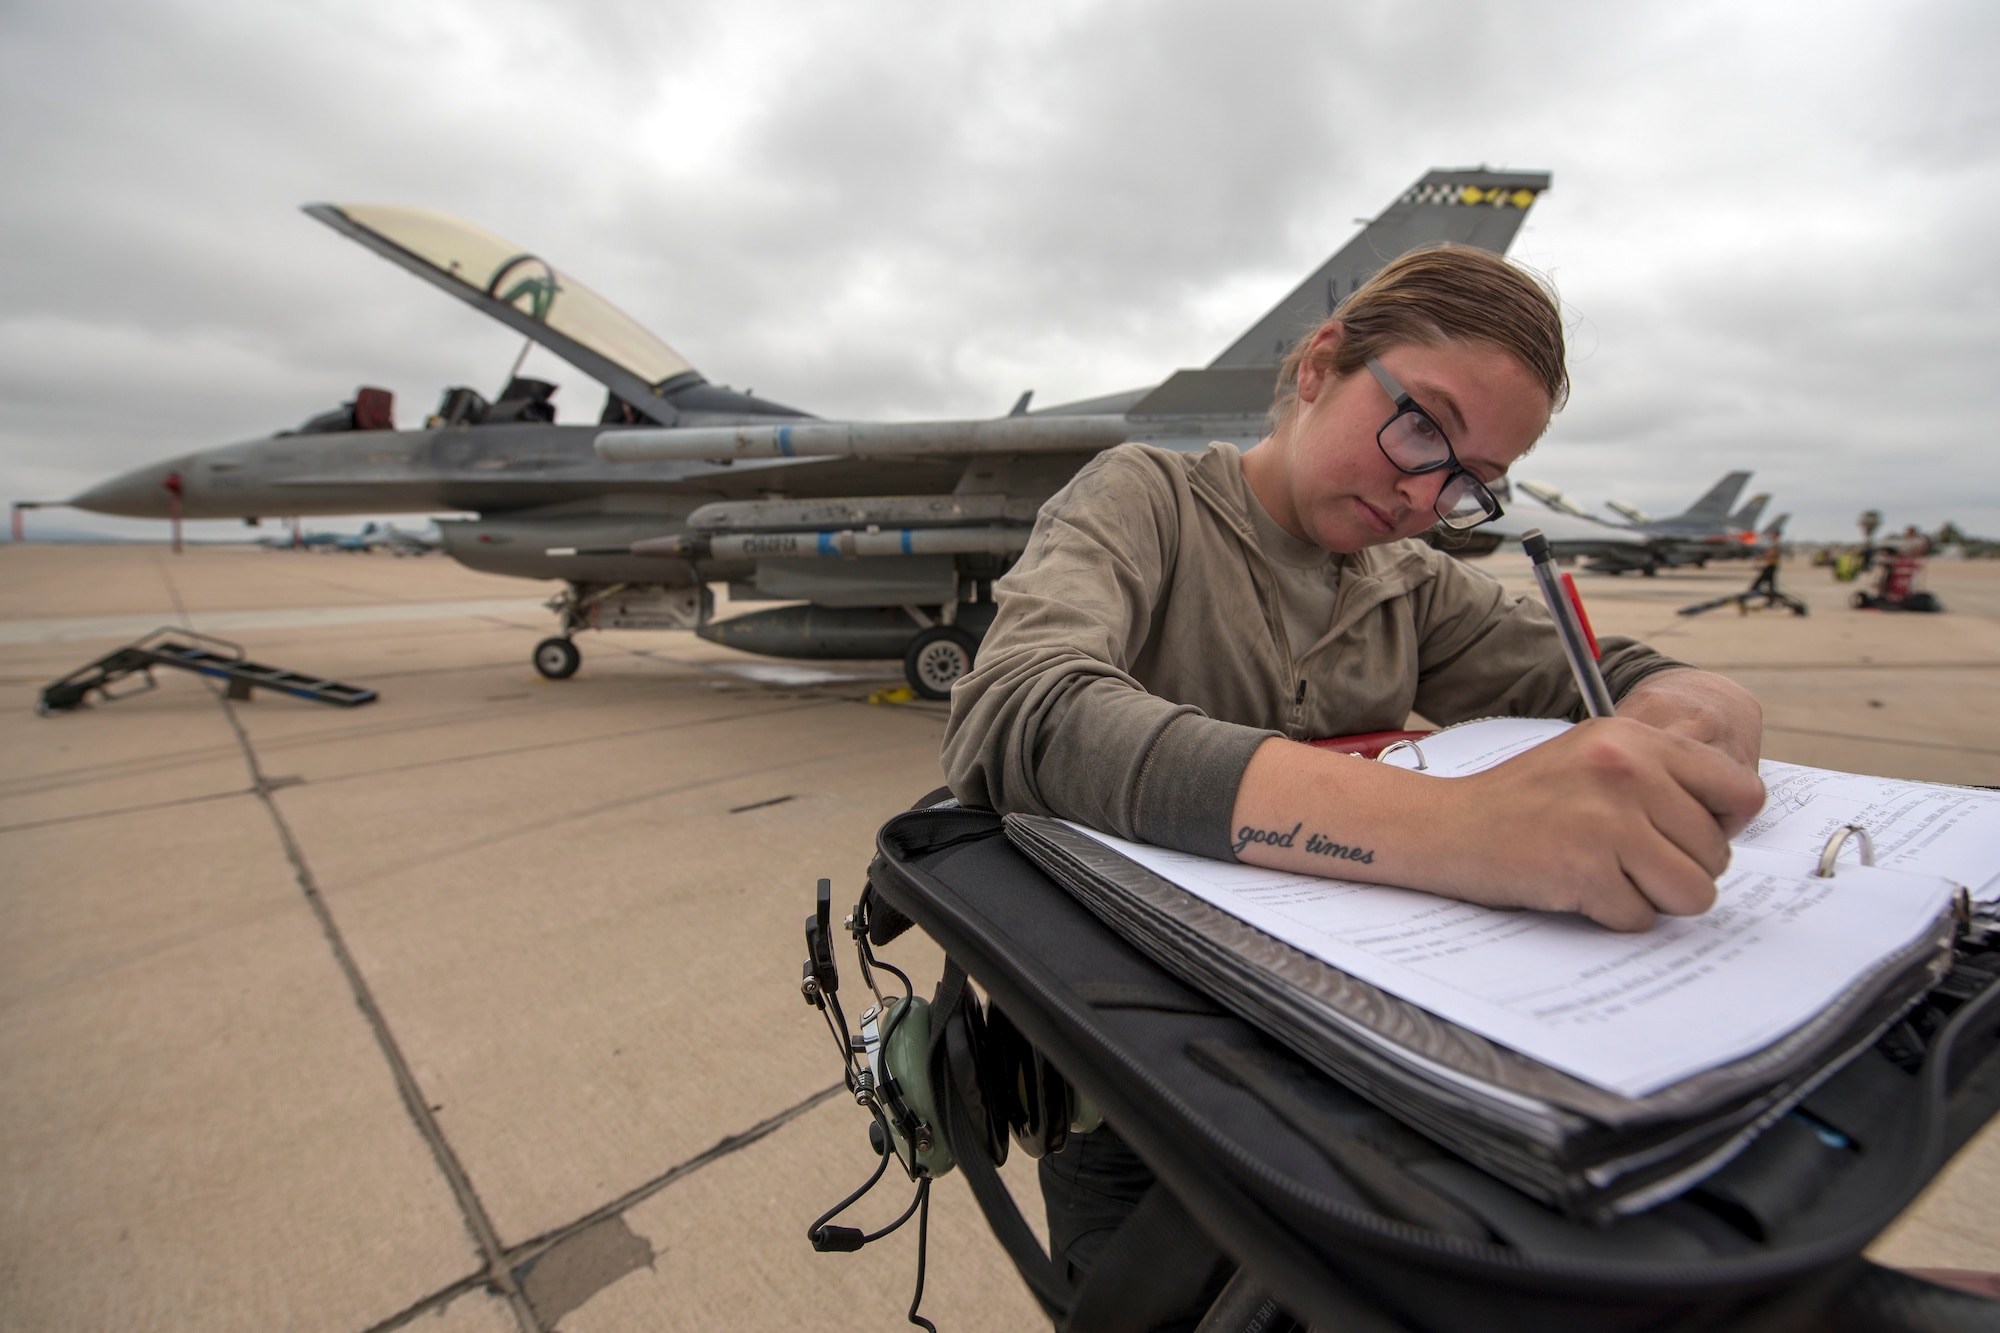 Airman 1st Class Viktoria Tooker, 311th Aircraft Maintenance Unit crew chief, writes in the maintenance log book June 4, 2019, on Marine Corps Air Station Miramar, Calif. Between the 314th Fighter Squadron and the 314th AMU, 168 personnel, 16 F-16 VIpers and 14 tons of equipment were fully functional during the temporary duty assignment in support of 258 flying training sorties. (U.S. Air Force photo by Staff Sgt. Christine Groening)